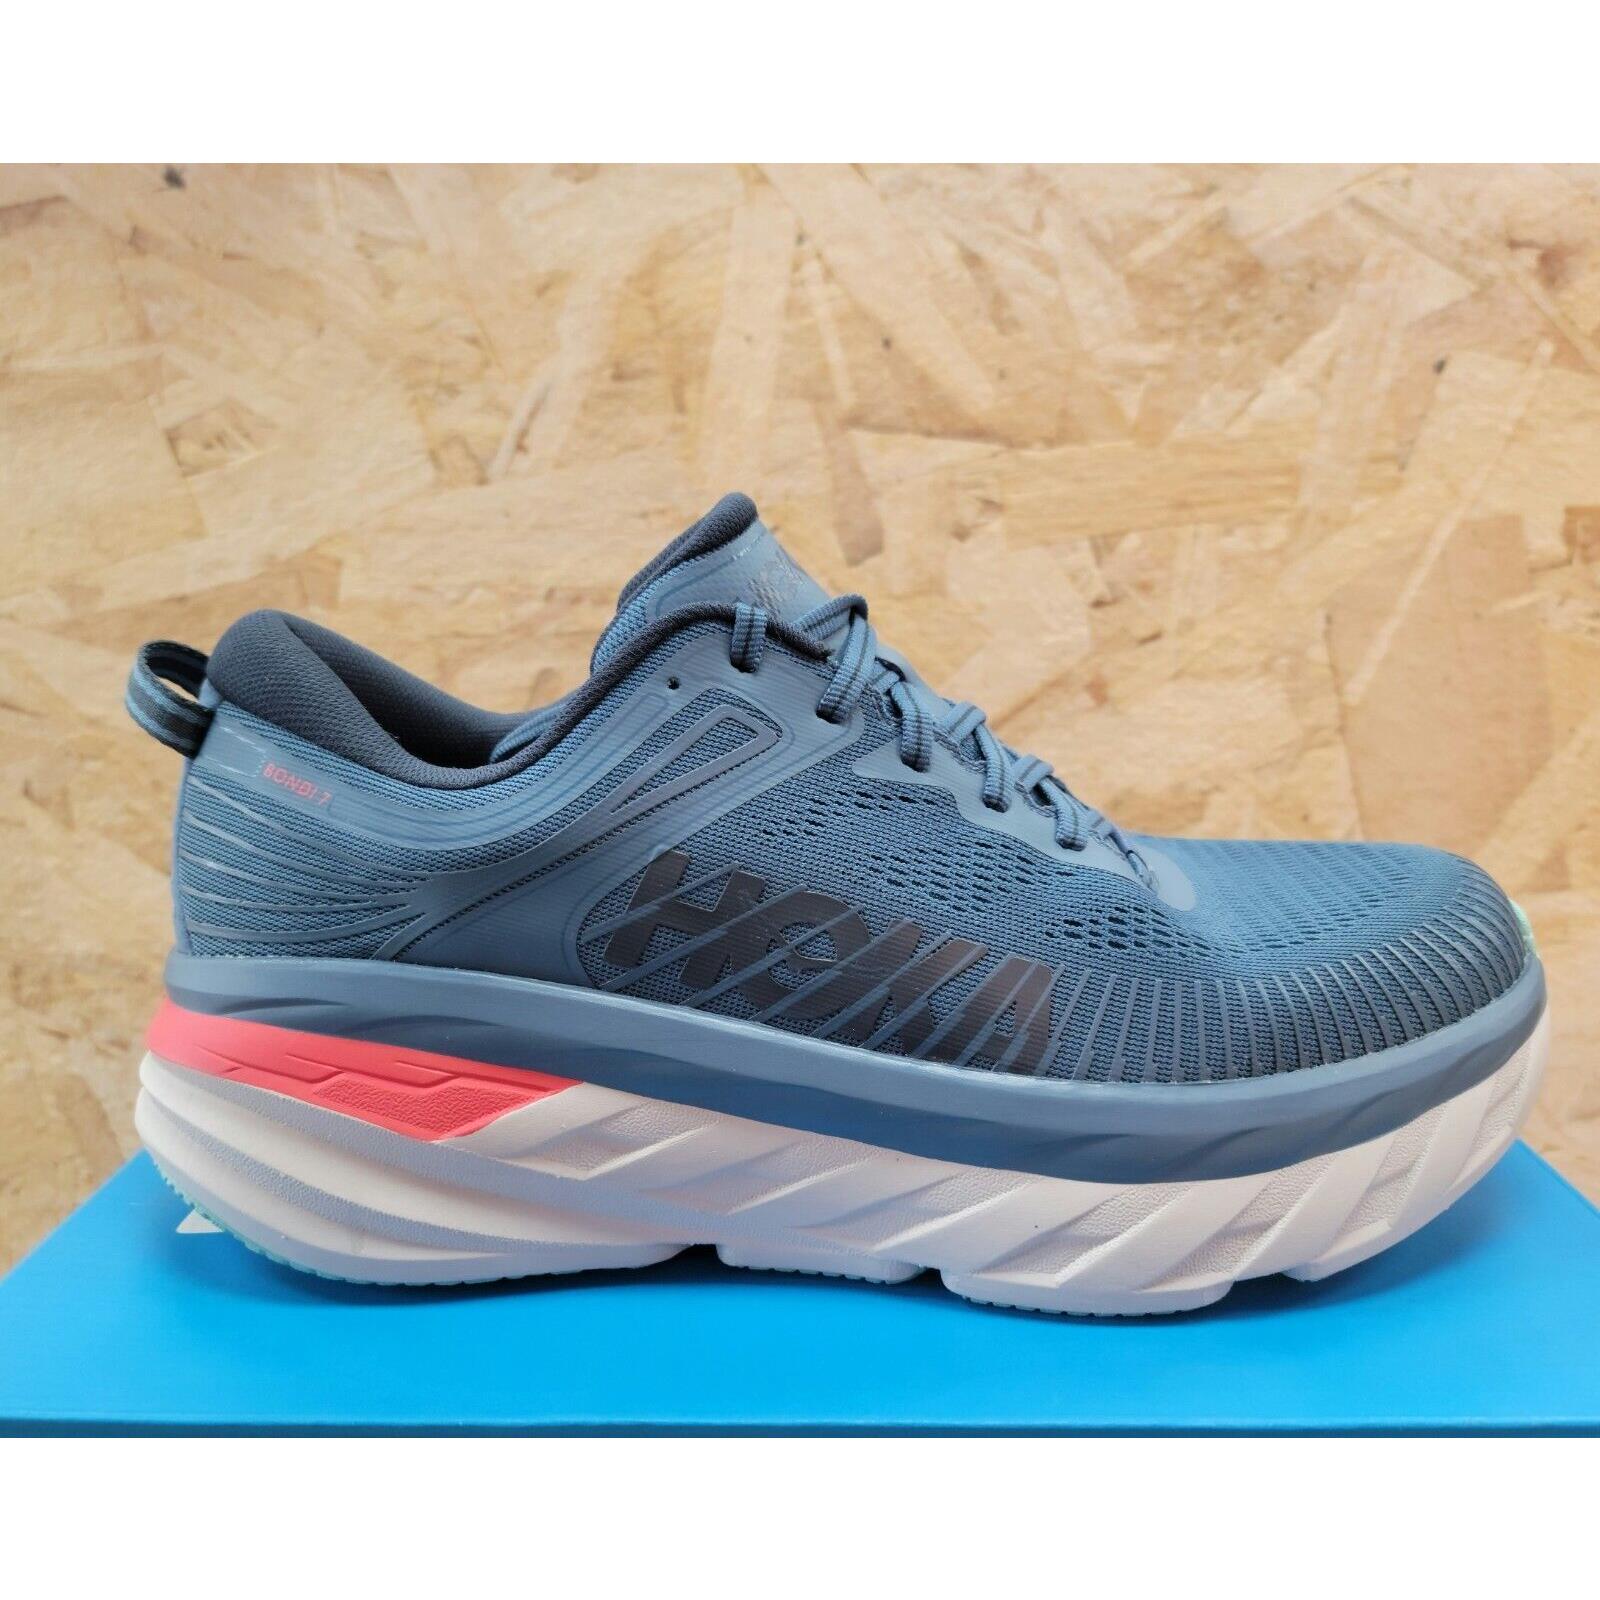 Hoka One One Men`s Bondi 7 Real Teal Mesh Running and Jogging Shoes For Everyday